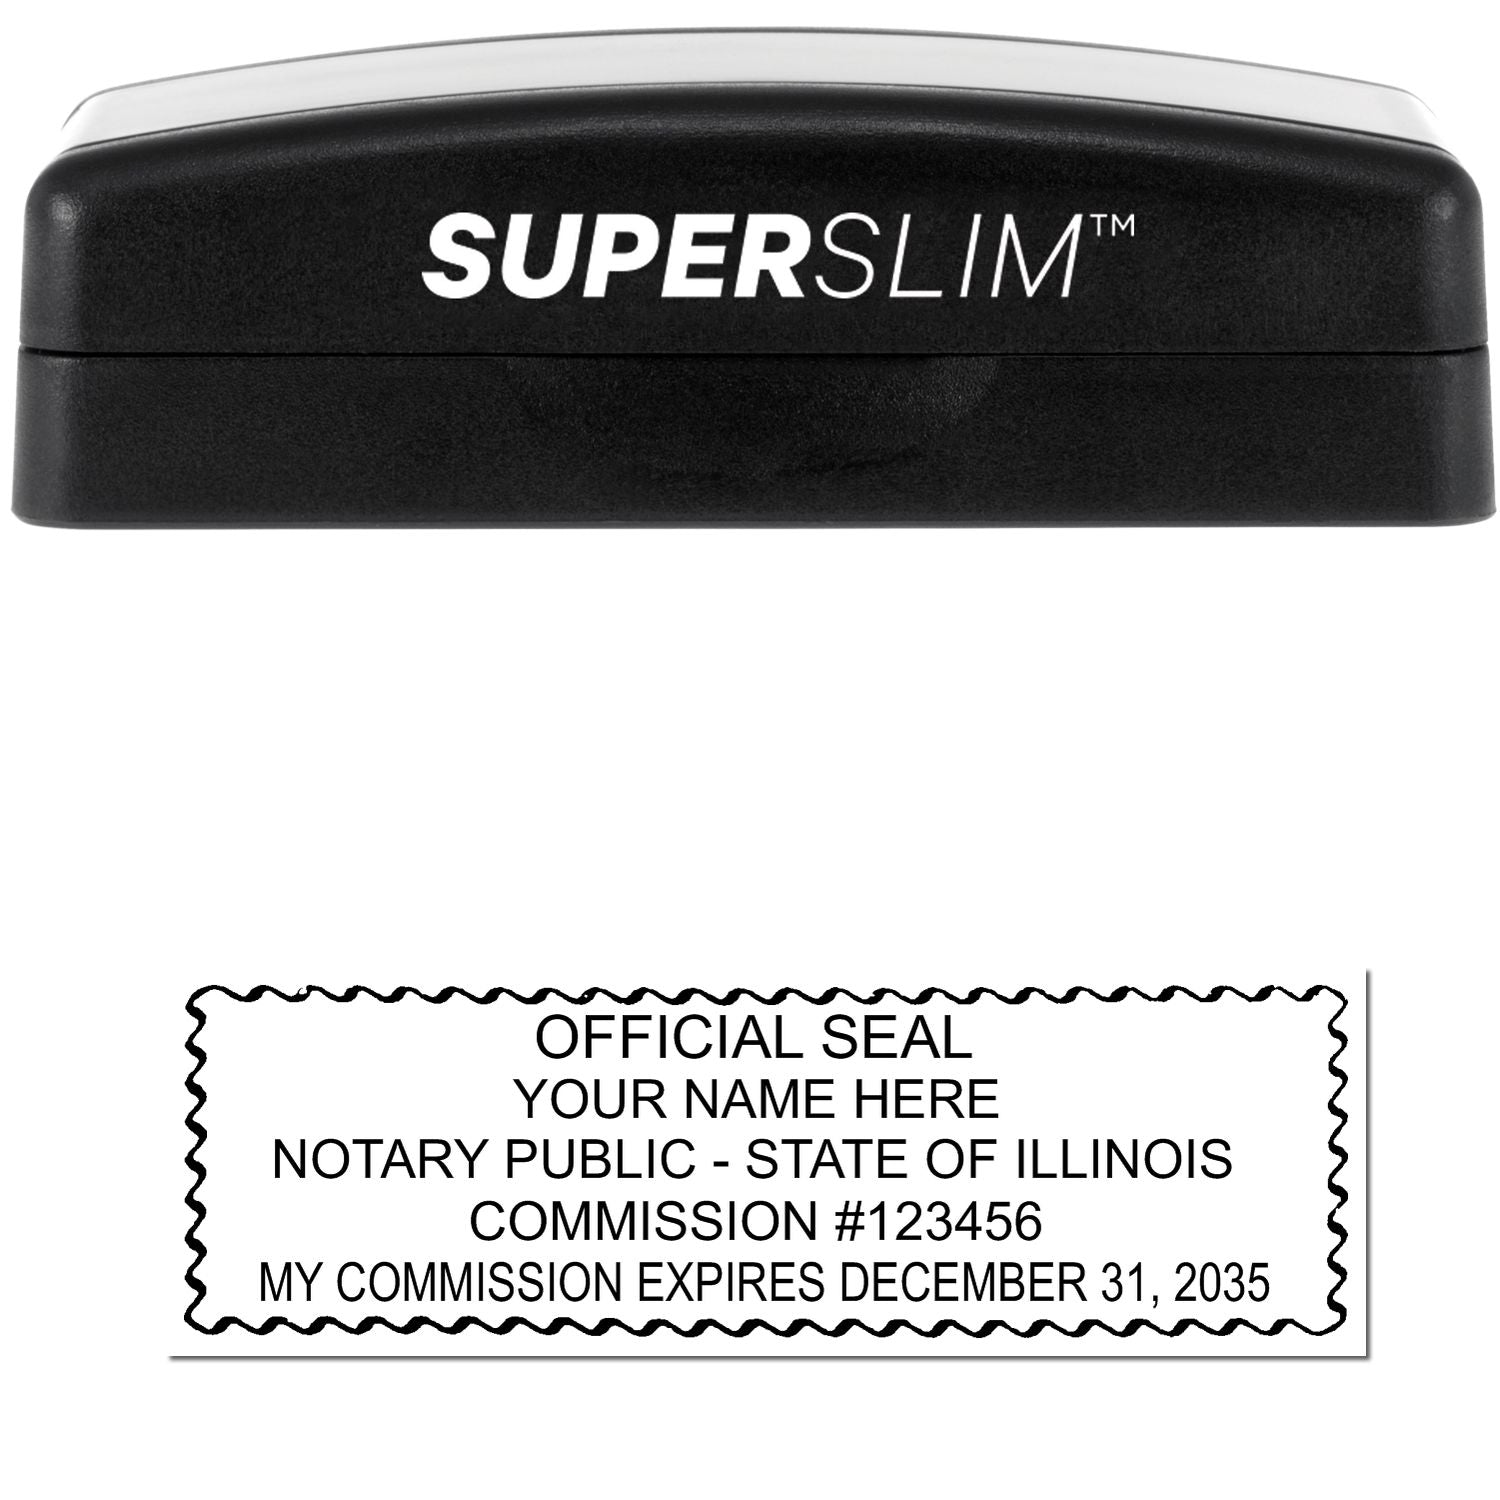 The main image for the Super Slim Illinois Notary Public Stamp depicting a sample of the imprint and electronic files